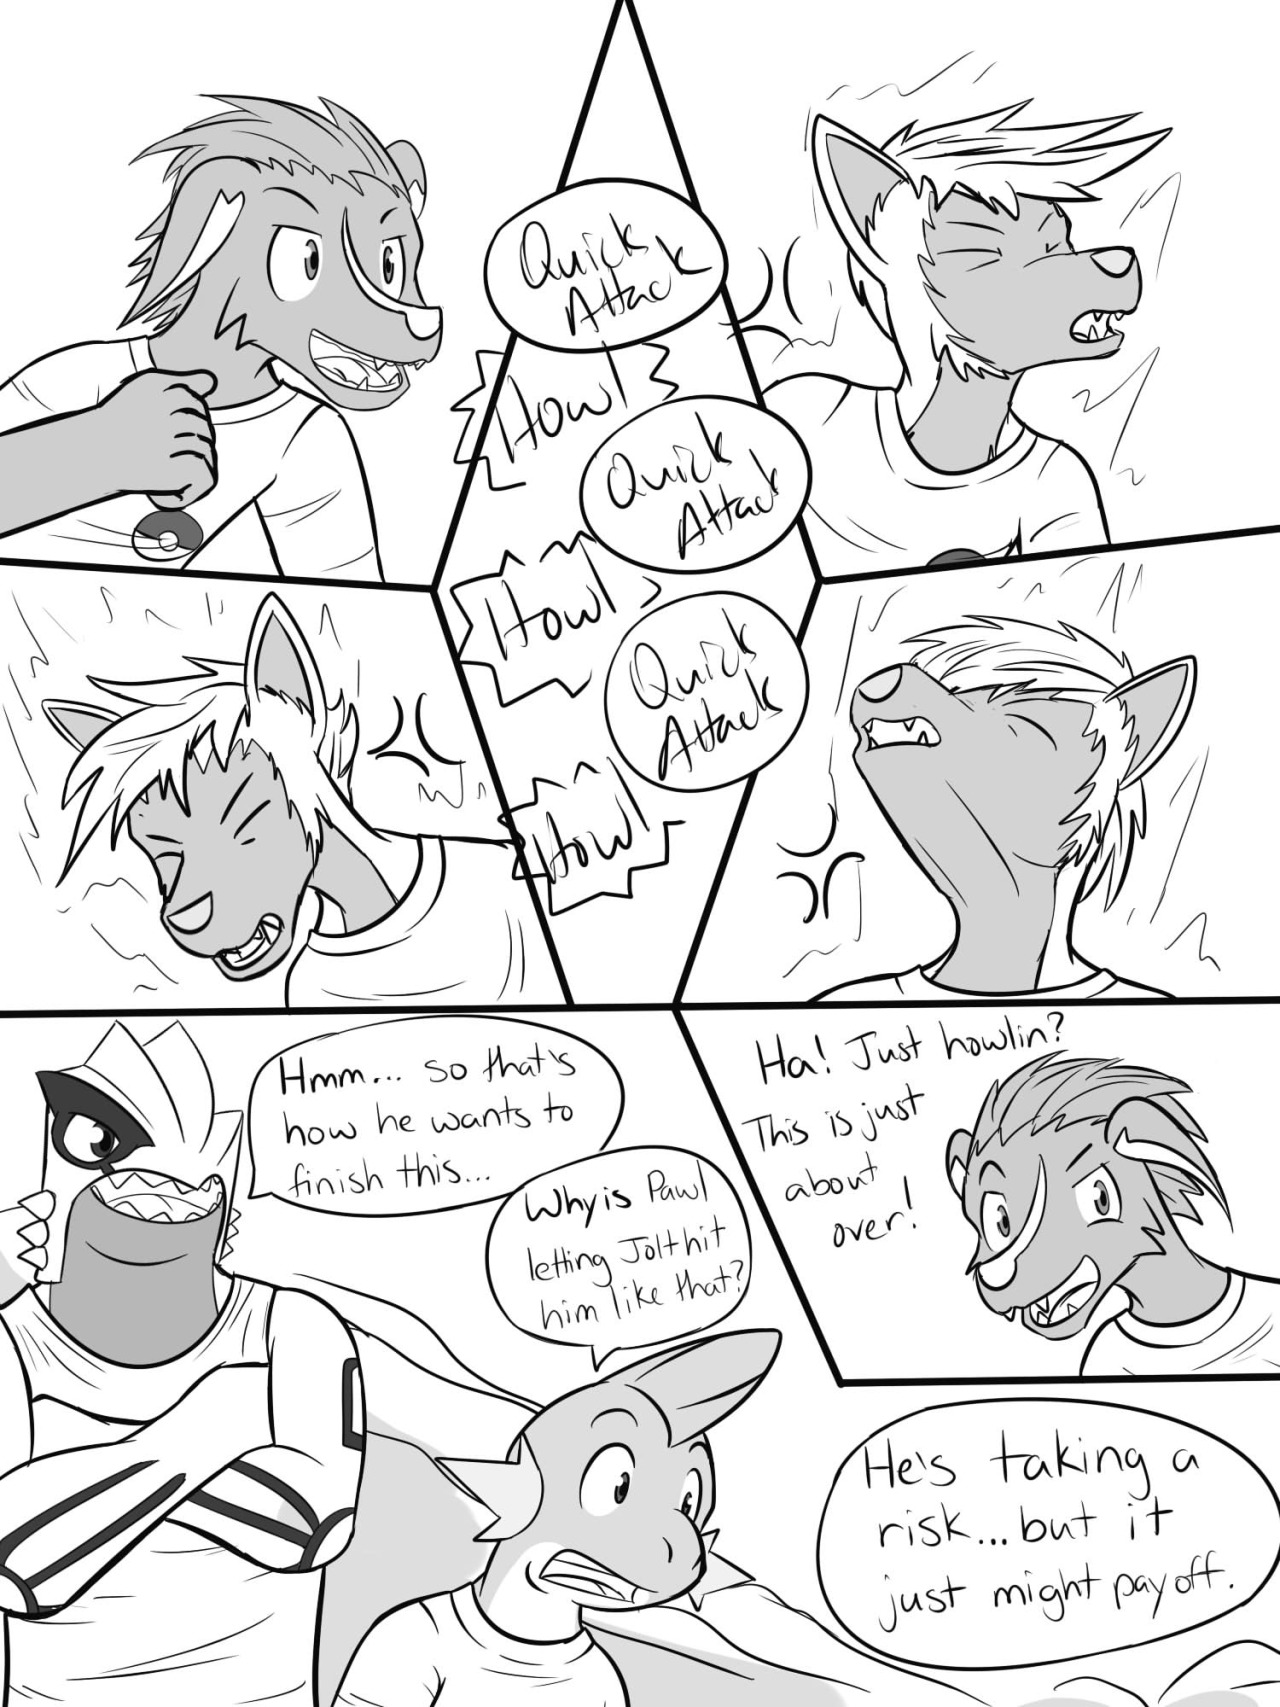 Pokemon Combat Academy, pg 40-41Pawl’s got an all or nothing strategy, who will